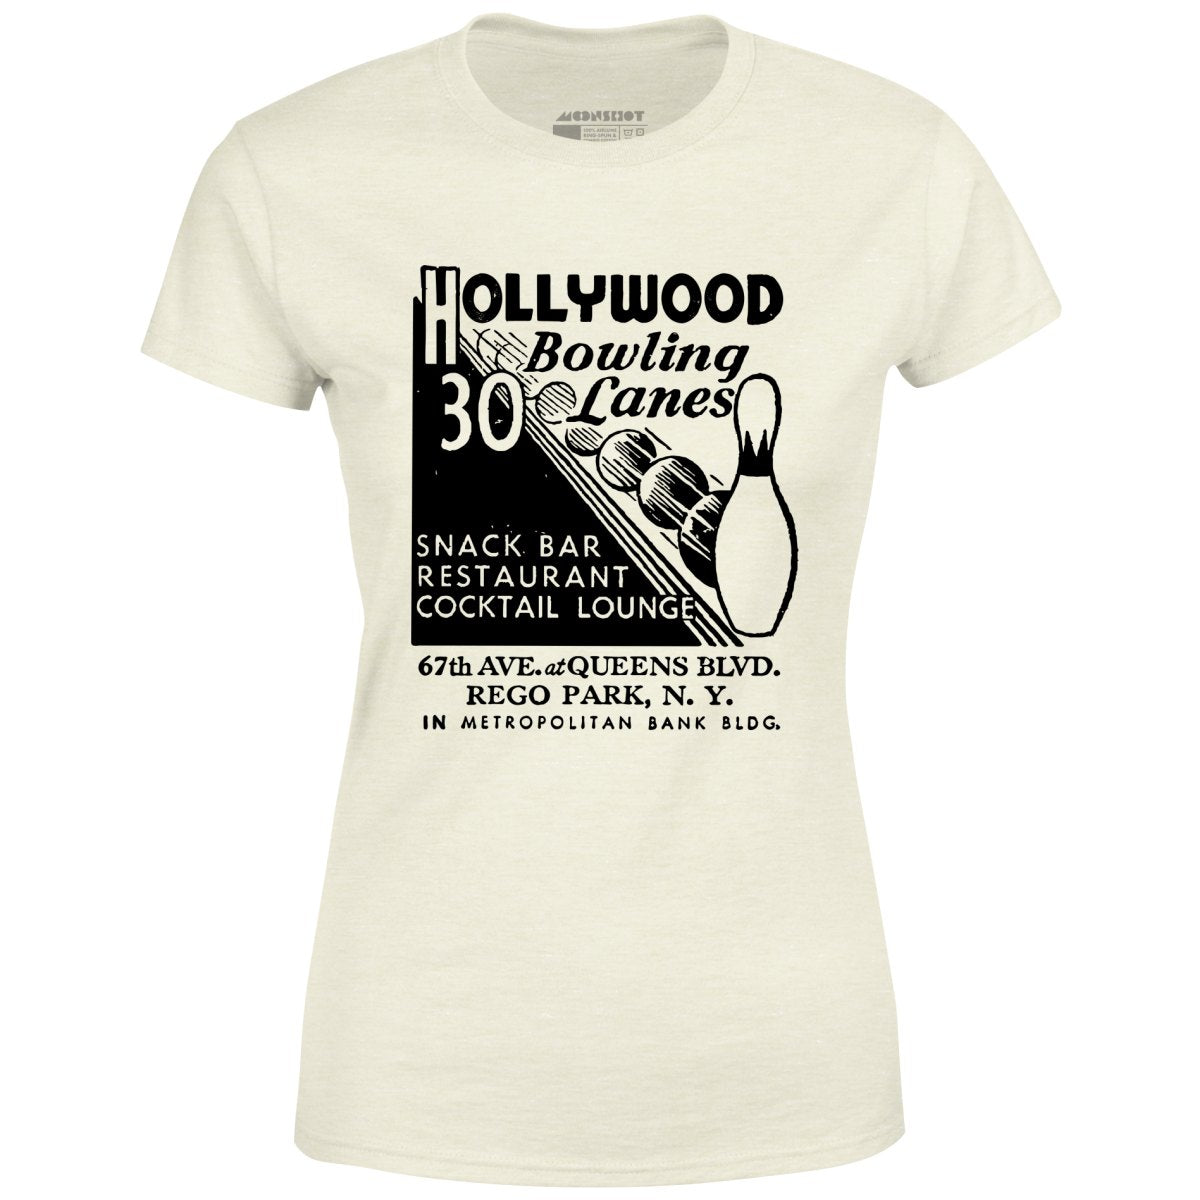 Hollywood Bowling Lanes - Rego Park, NY - Vintage Bowling Alley - Women's T-Shirt